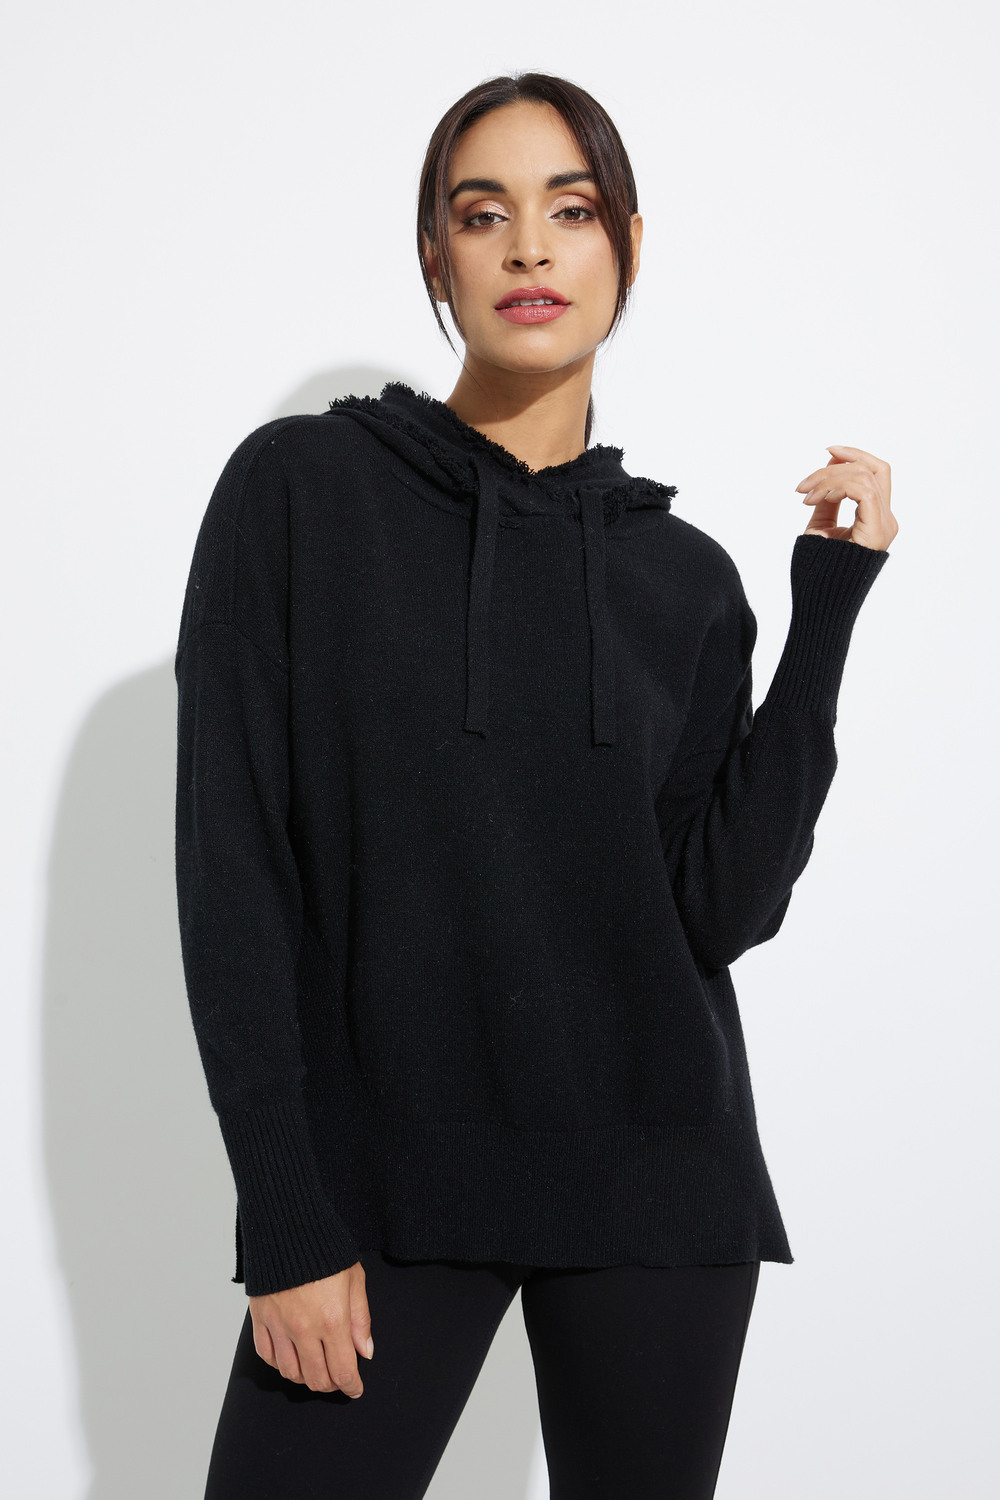 Hooded Sweater With Side Details Style C2416. Black